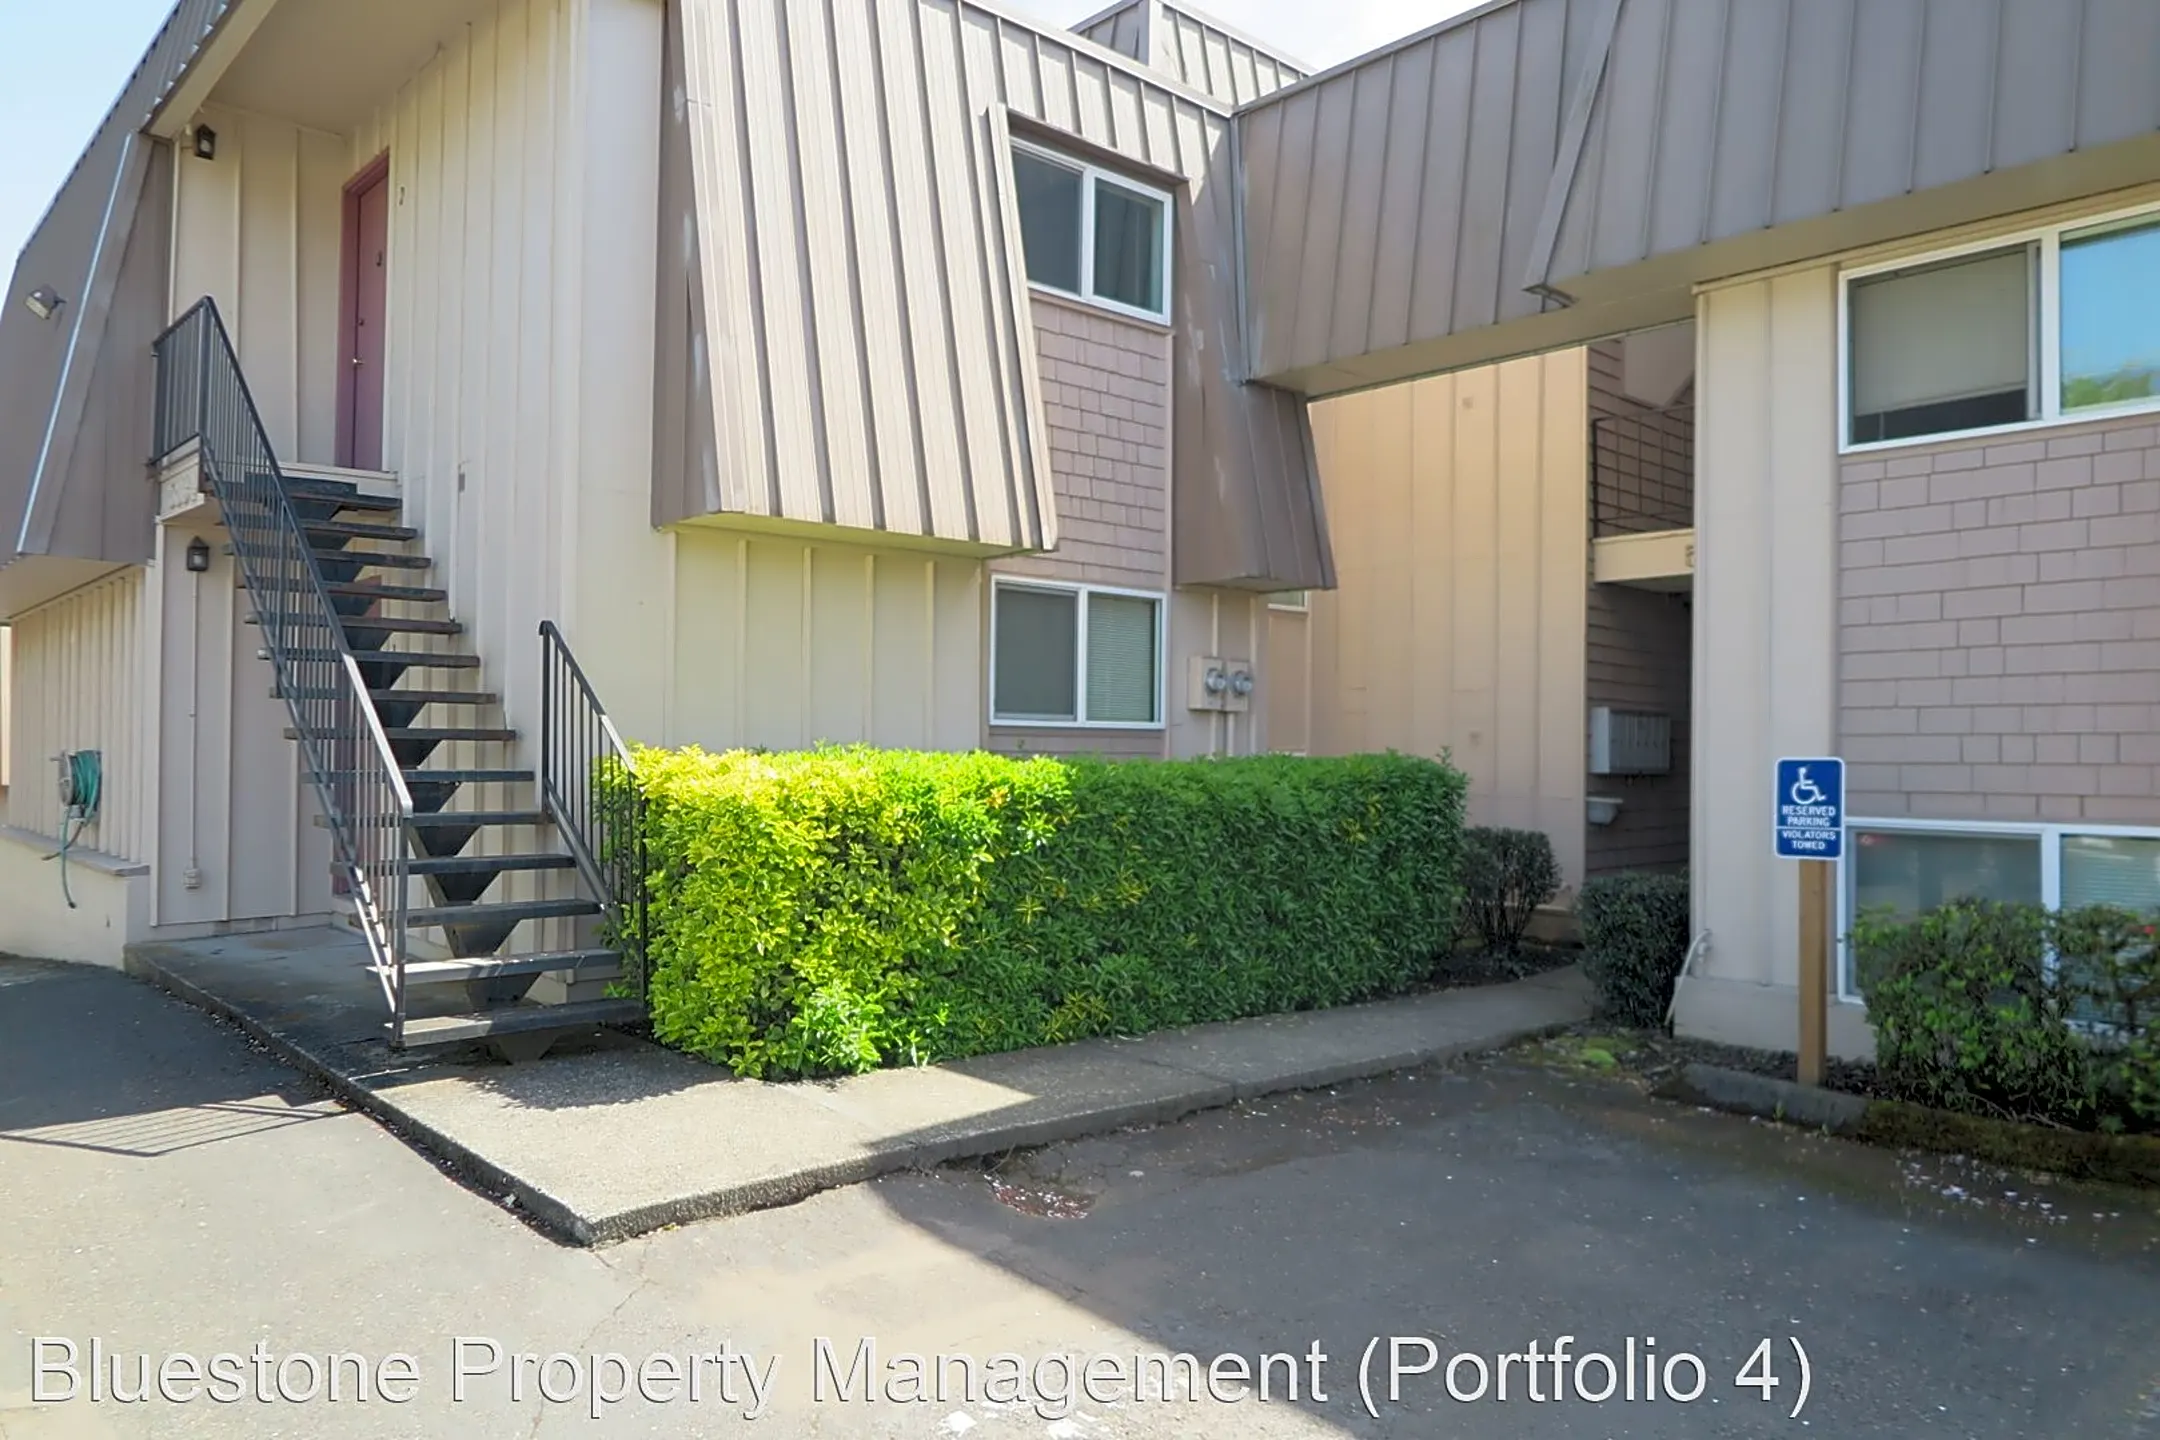 Building - Cherry Hill Apartments - Portland, OR